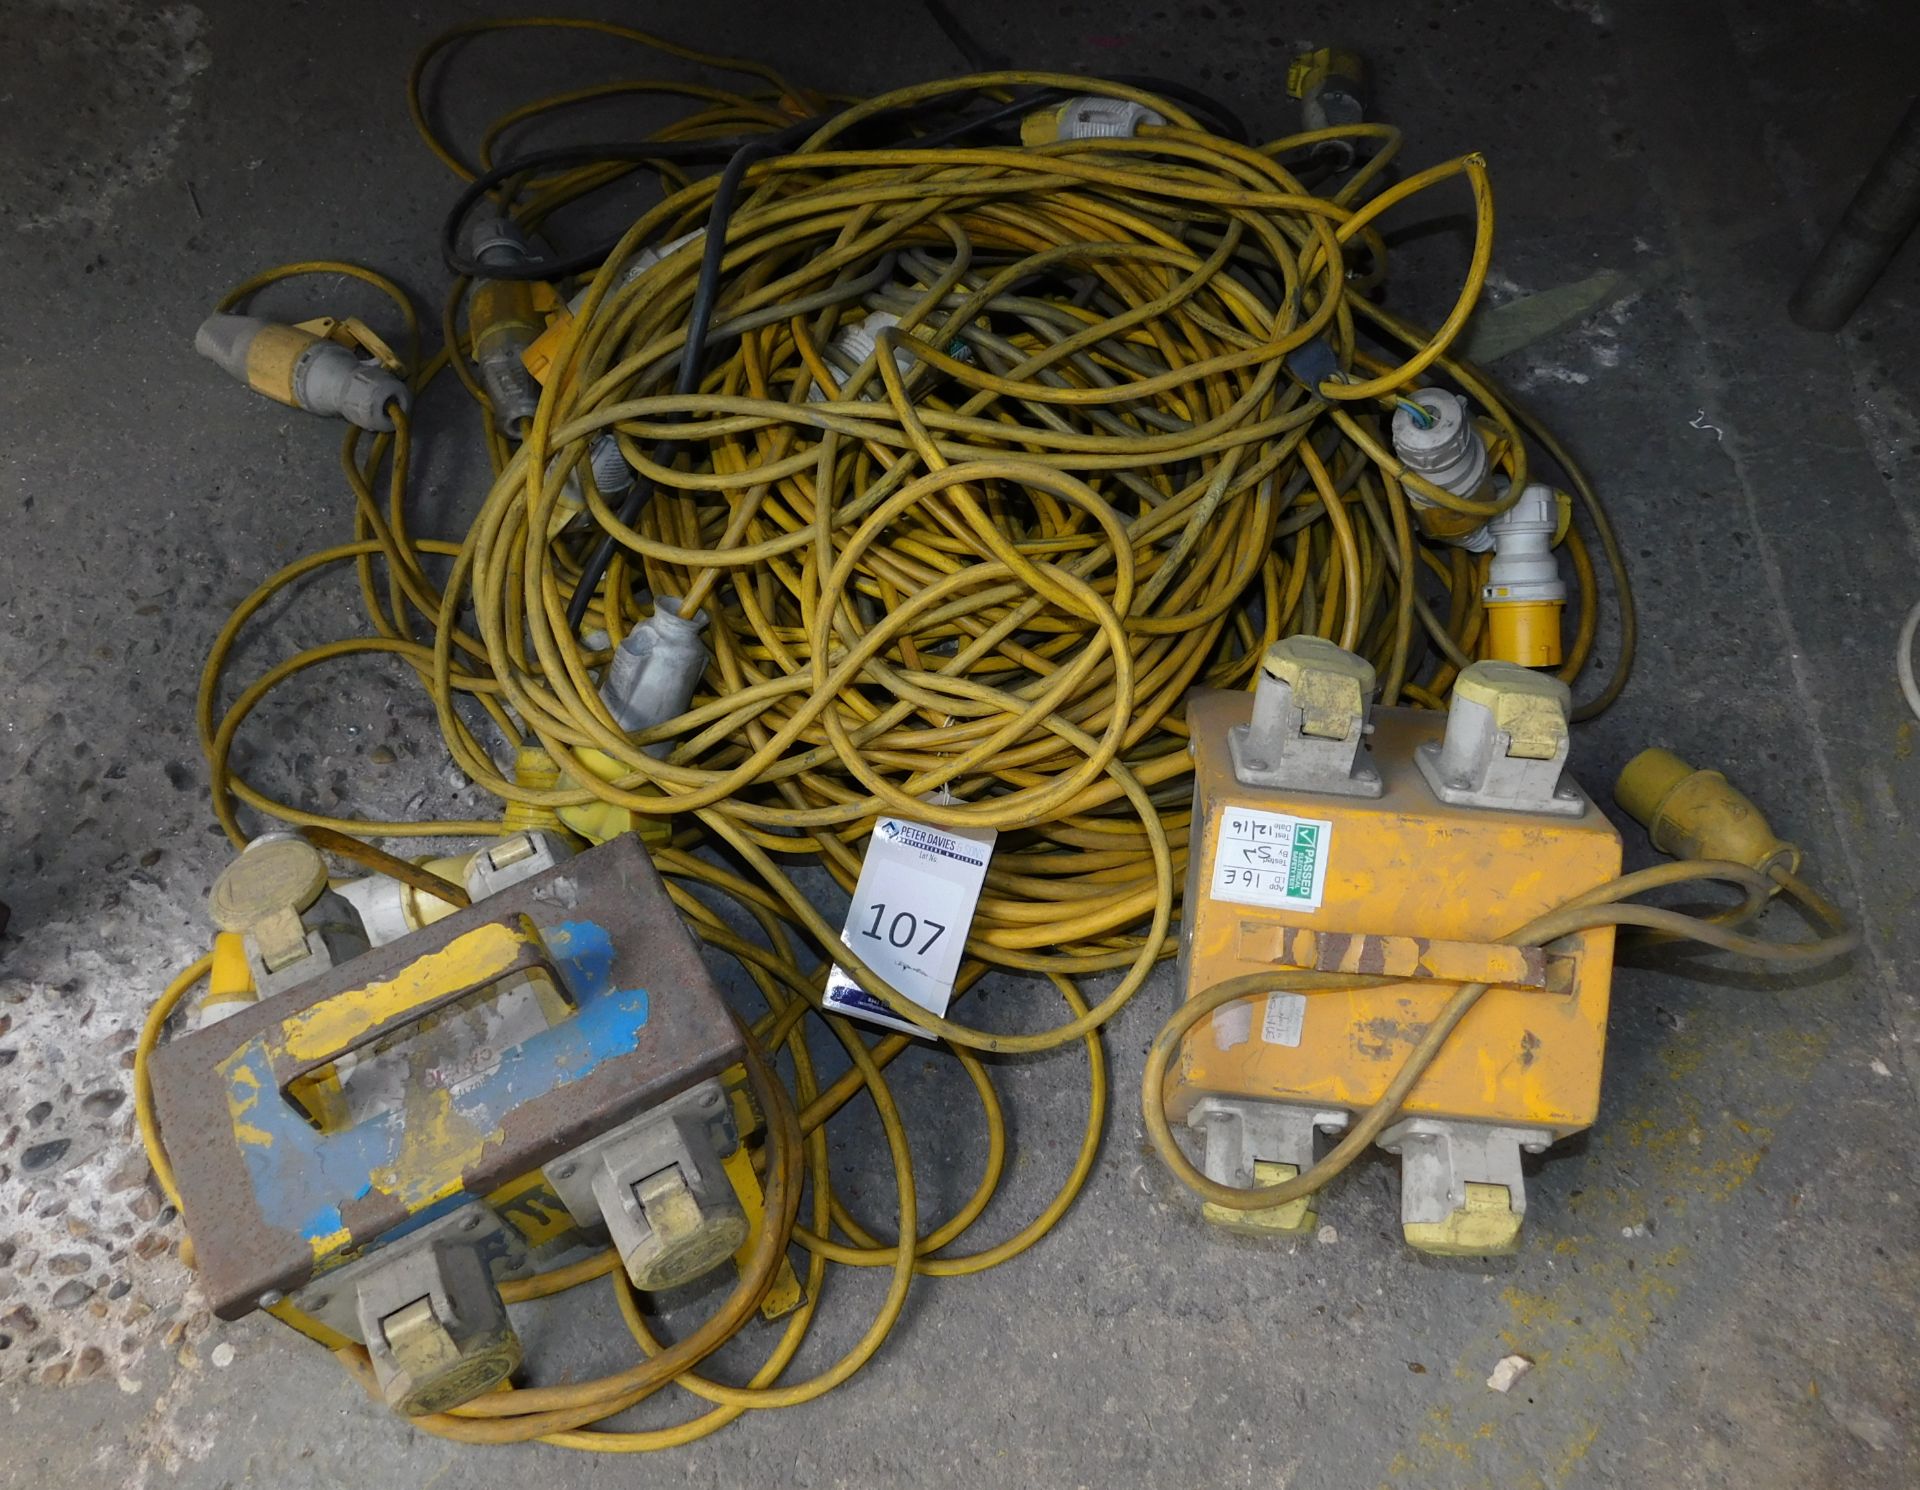 Quantity of 110V Extension Leads & 2 Junction Boxes